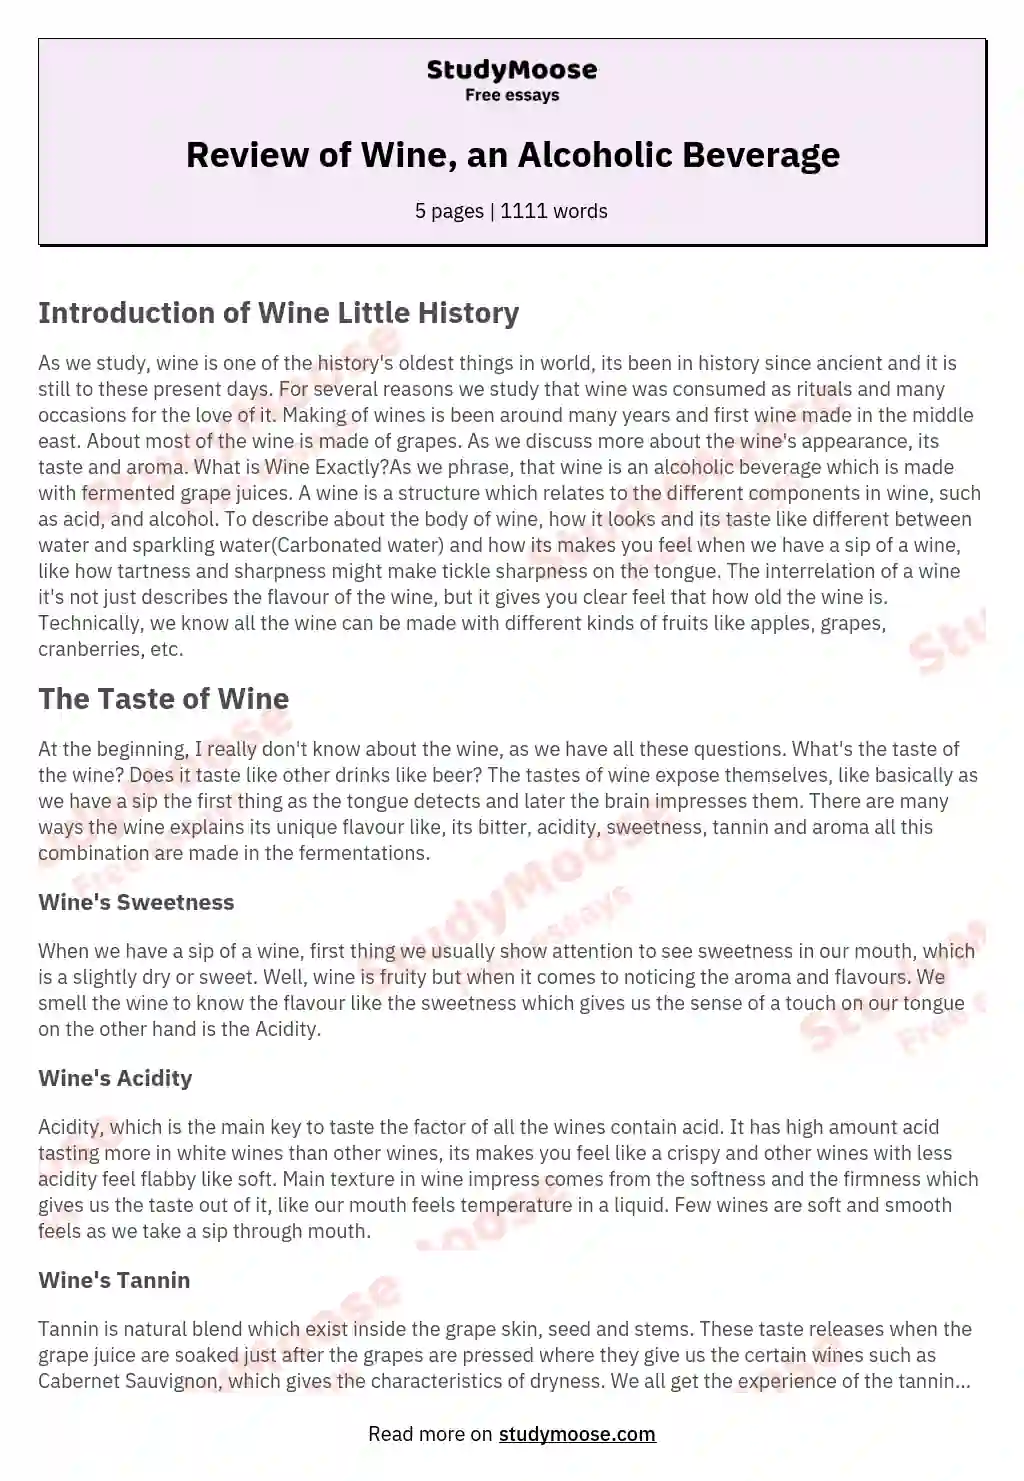 Review of Wine, an Alcoholic Beverage essay